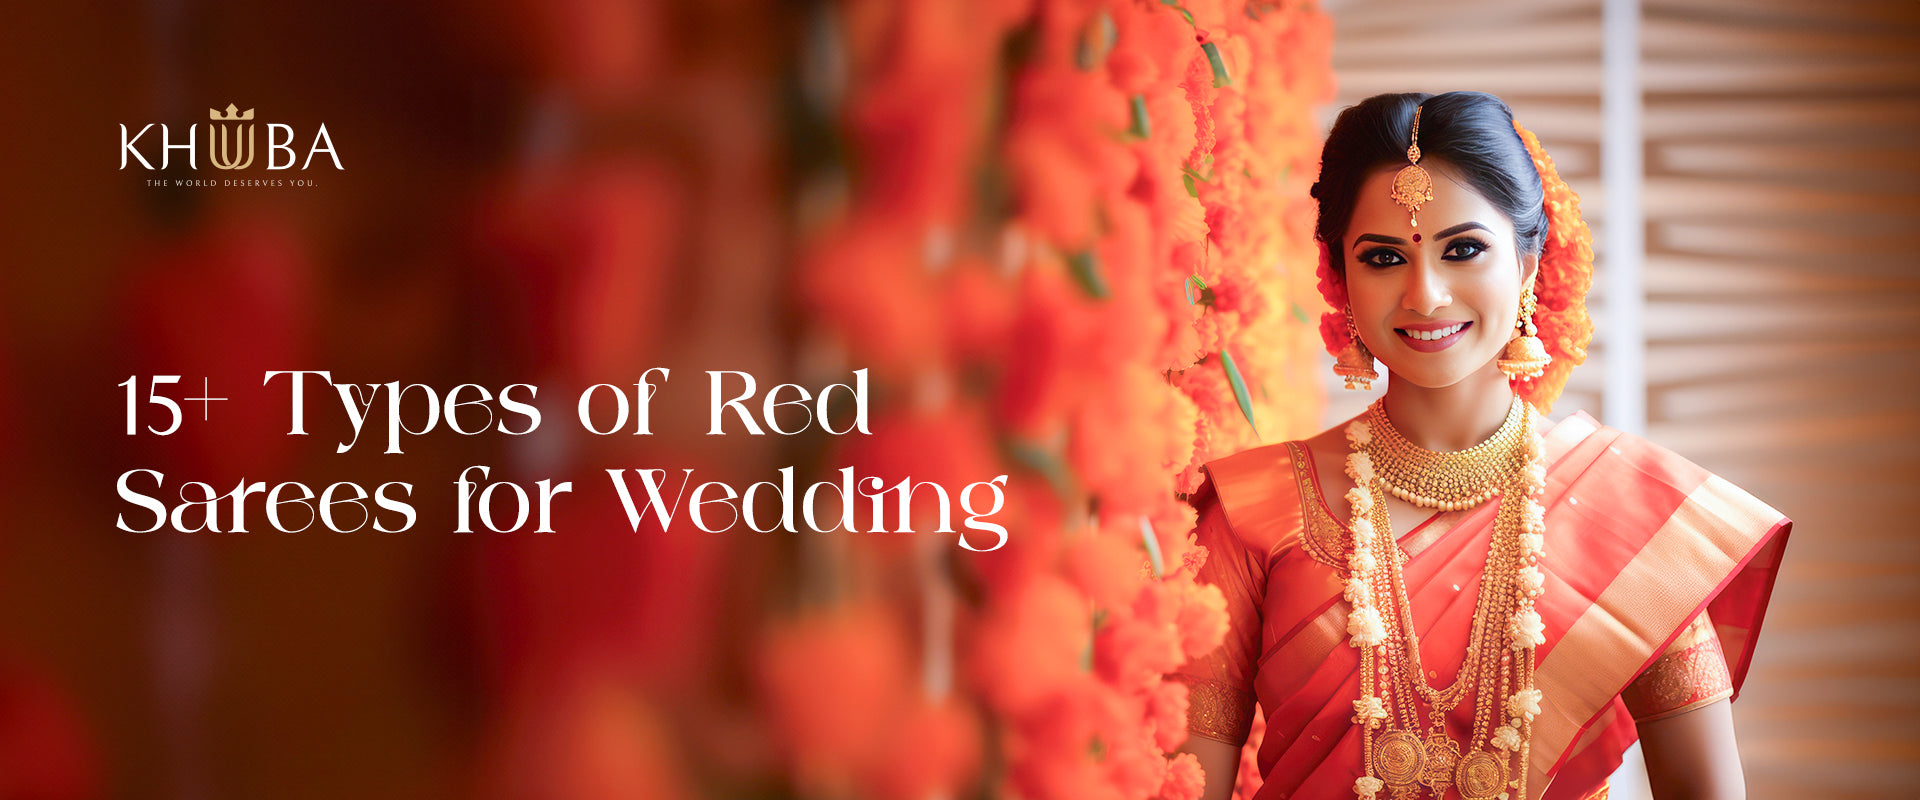 15+ Types of Red Sarees for Your Wedding